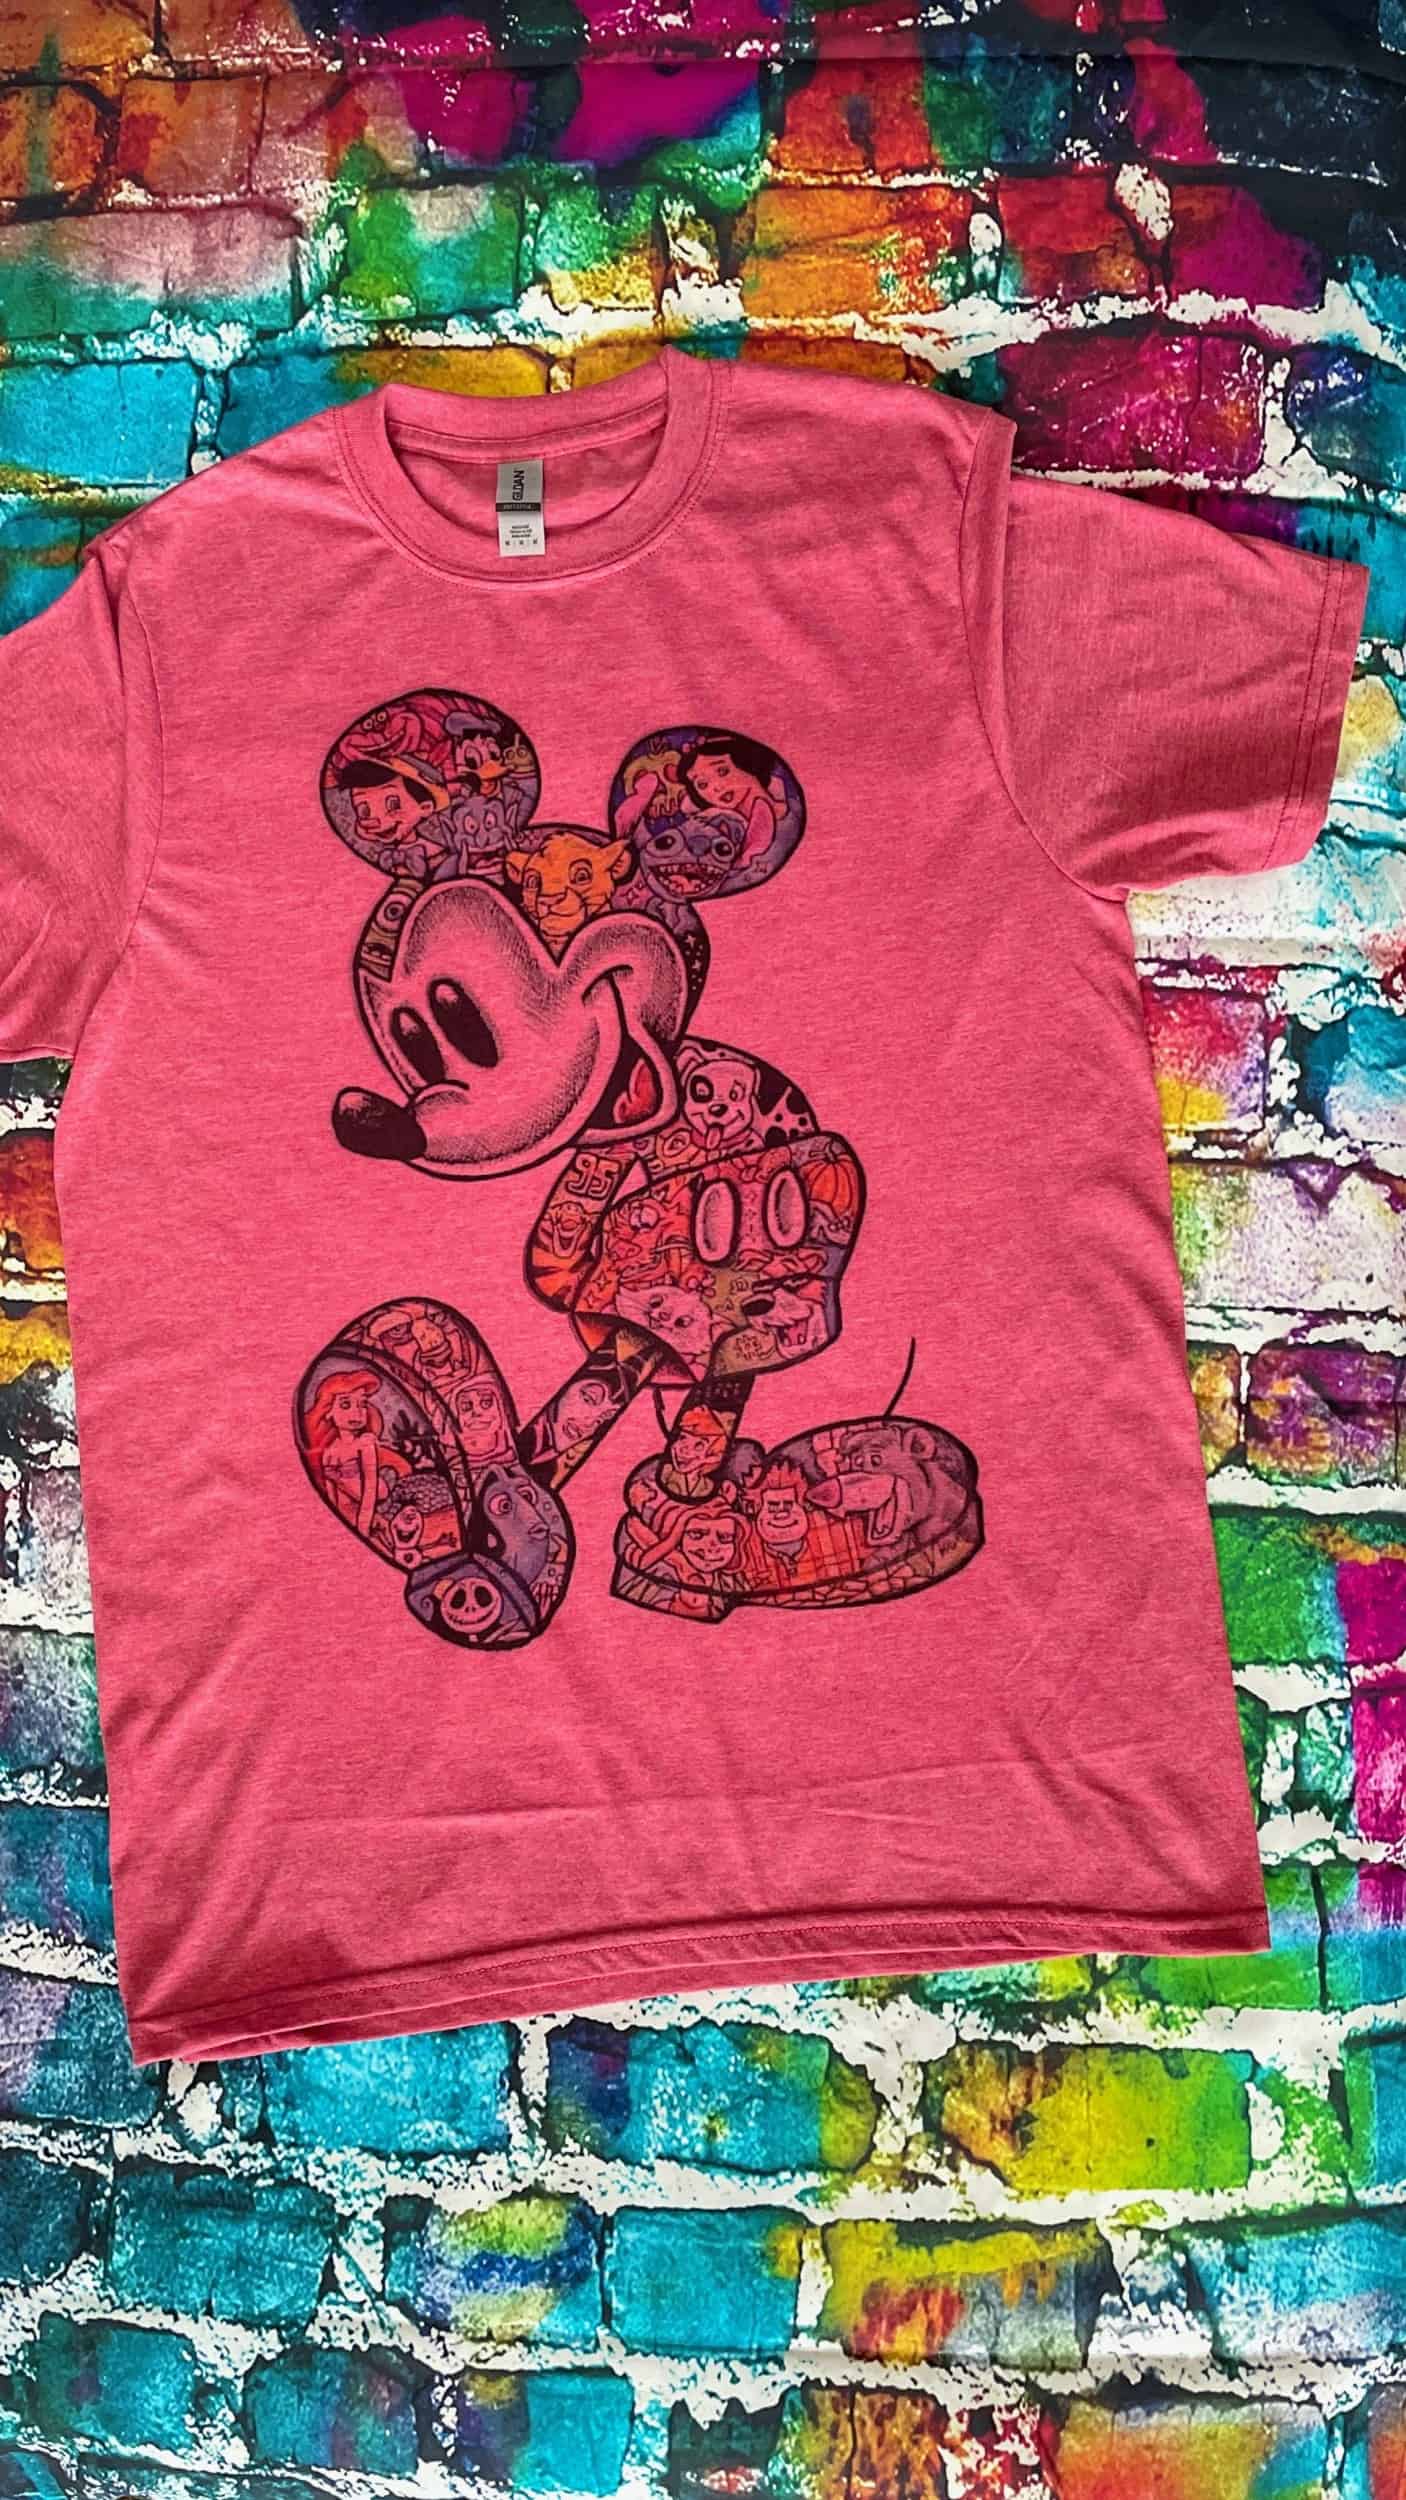 This Custom Sublimated Shirts is made with love by Two Moms Unique Creation! Shop more unique gift ideas today with Spots Initiatives, the best way to support creators.